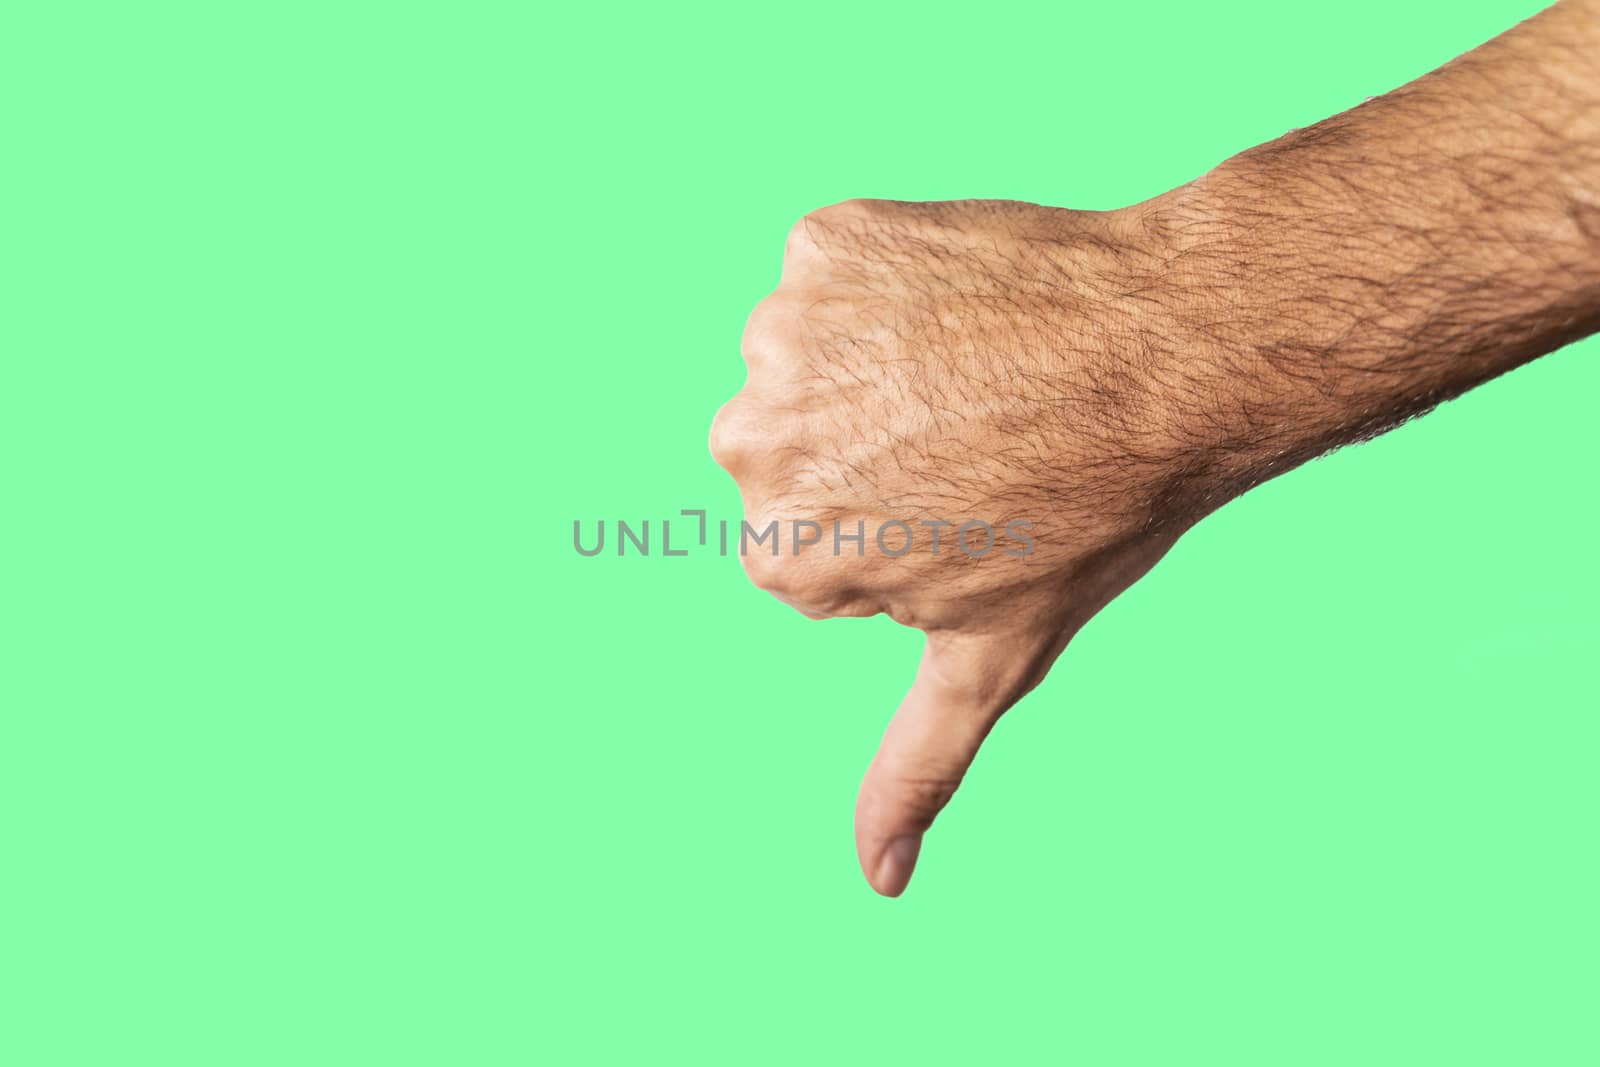 Thumb down hand sign isolated on a green background by tanaonte